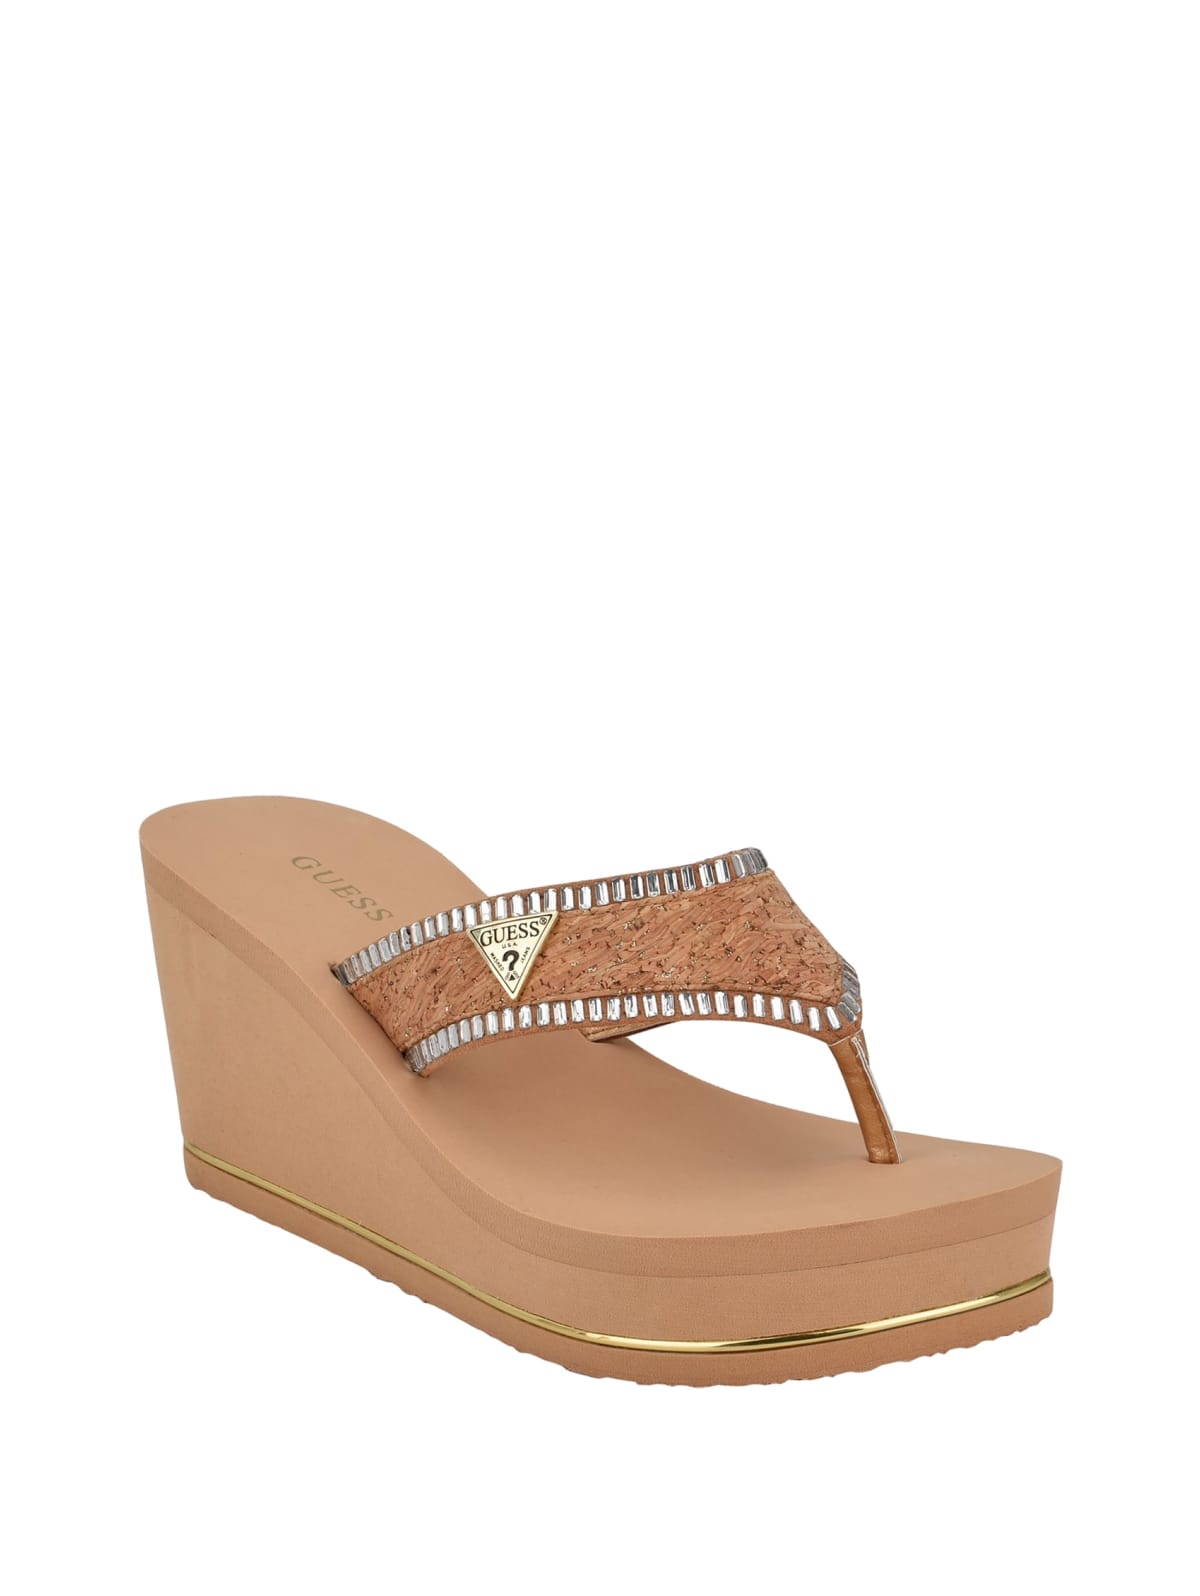 guess wedges